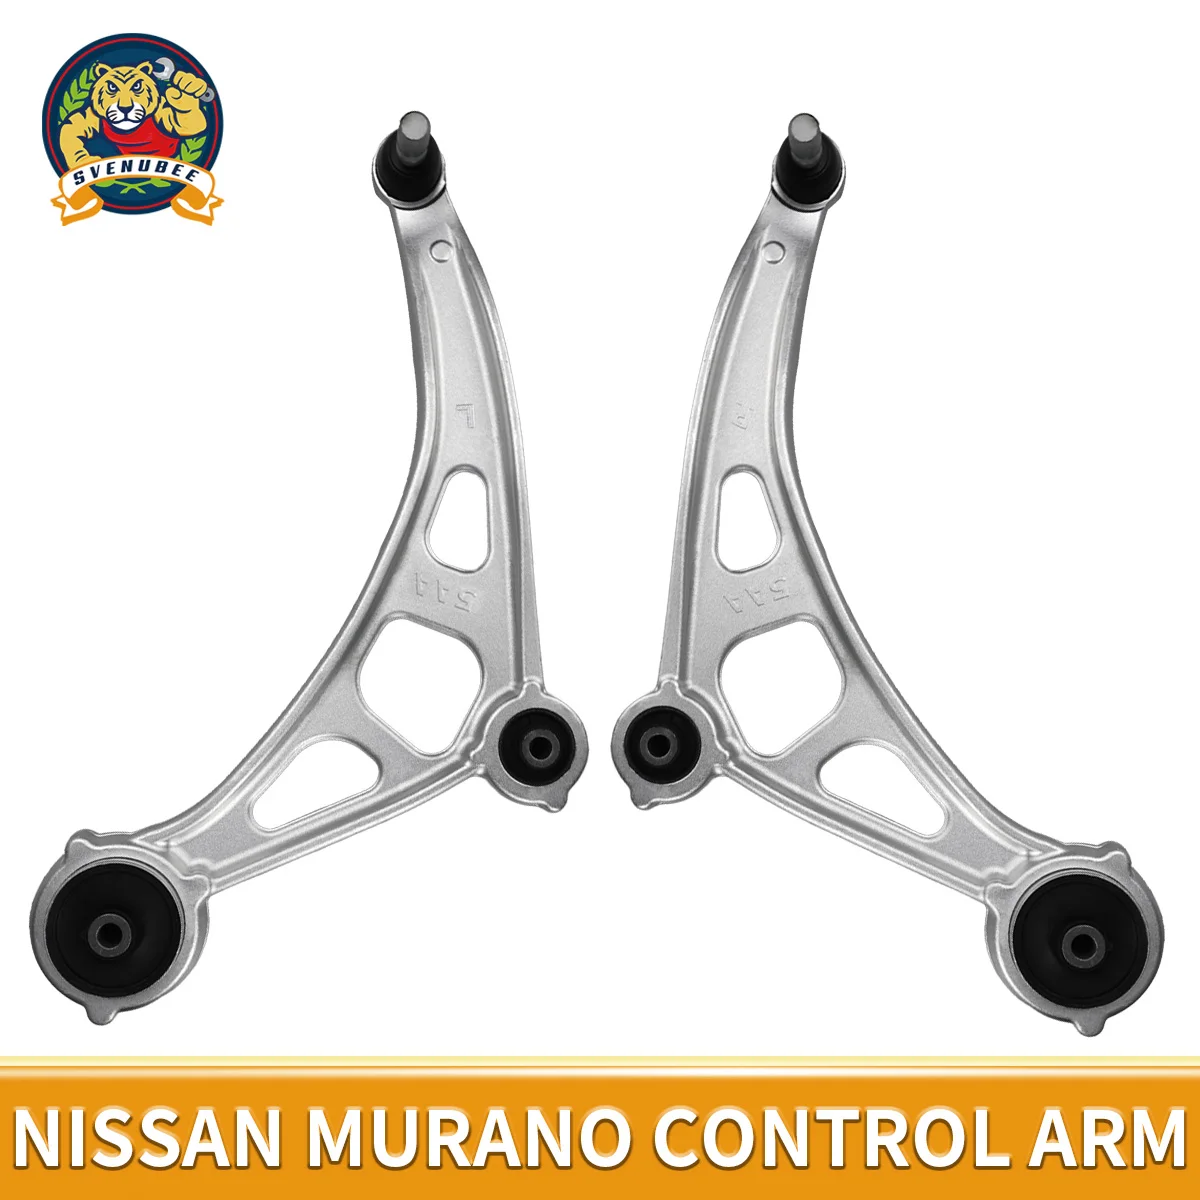 

Svenubee 2pcs Front Lower Control Arms with Ball Joint Left & Right Sets for Nissan Murano 2015 2016 2017 2018 2019 2020